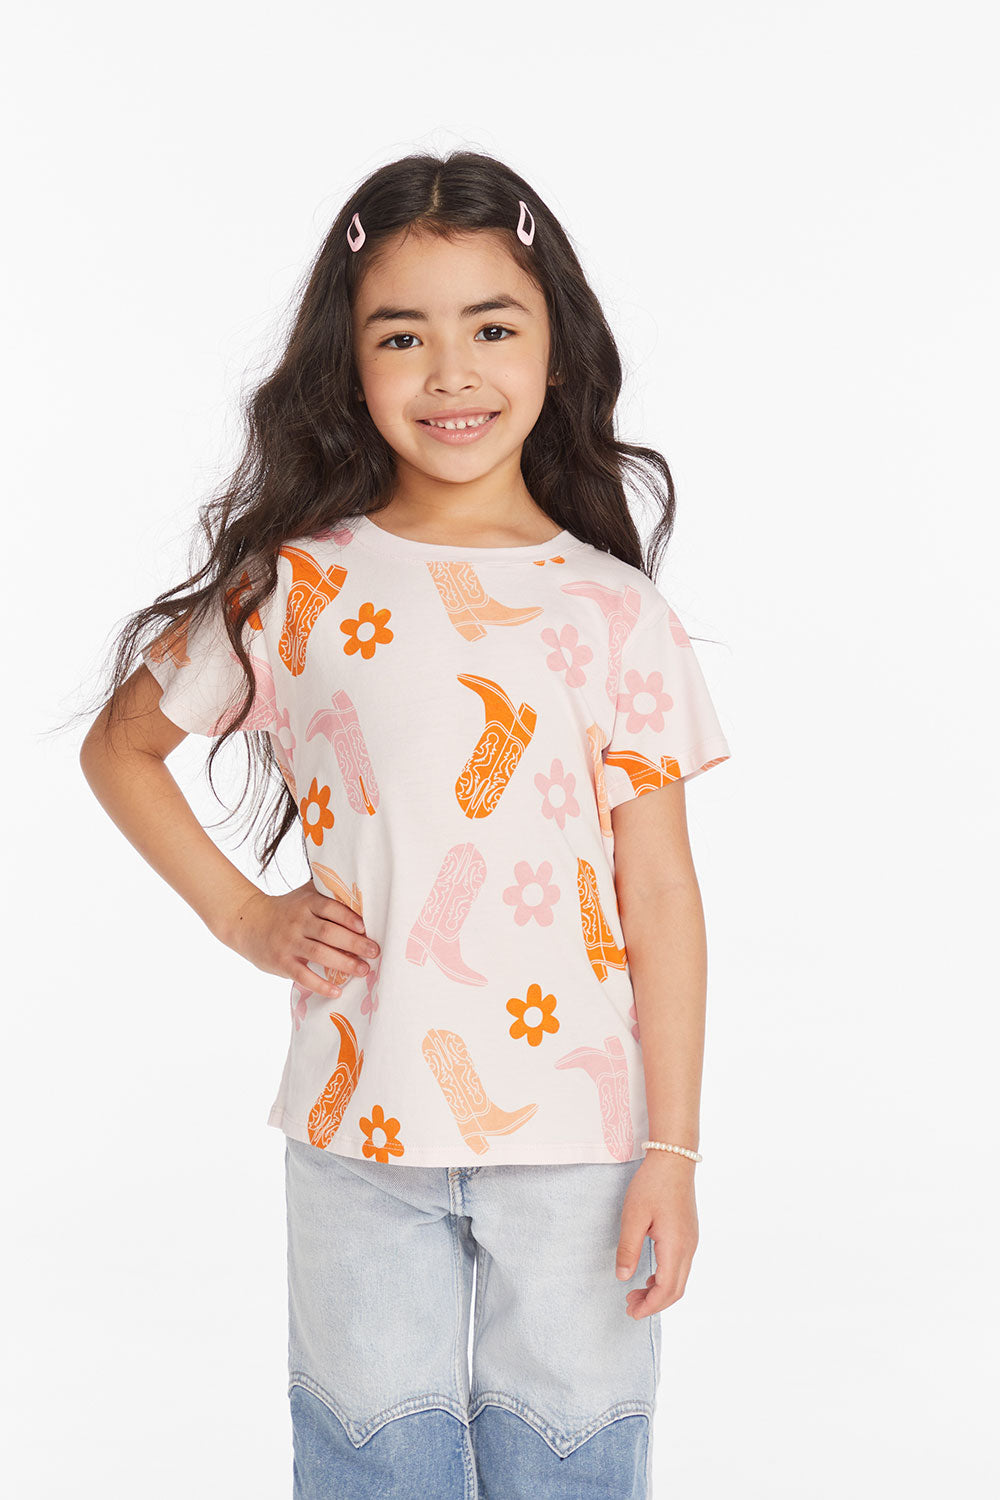 Cowgirl Boots Girls Tee Girls chaserbrand